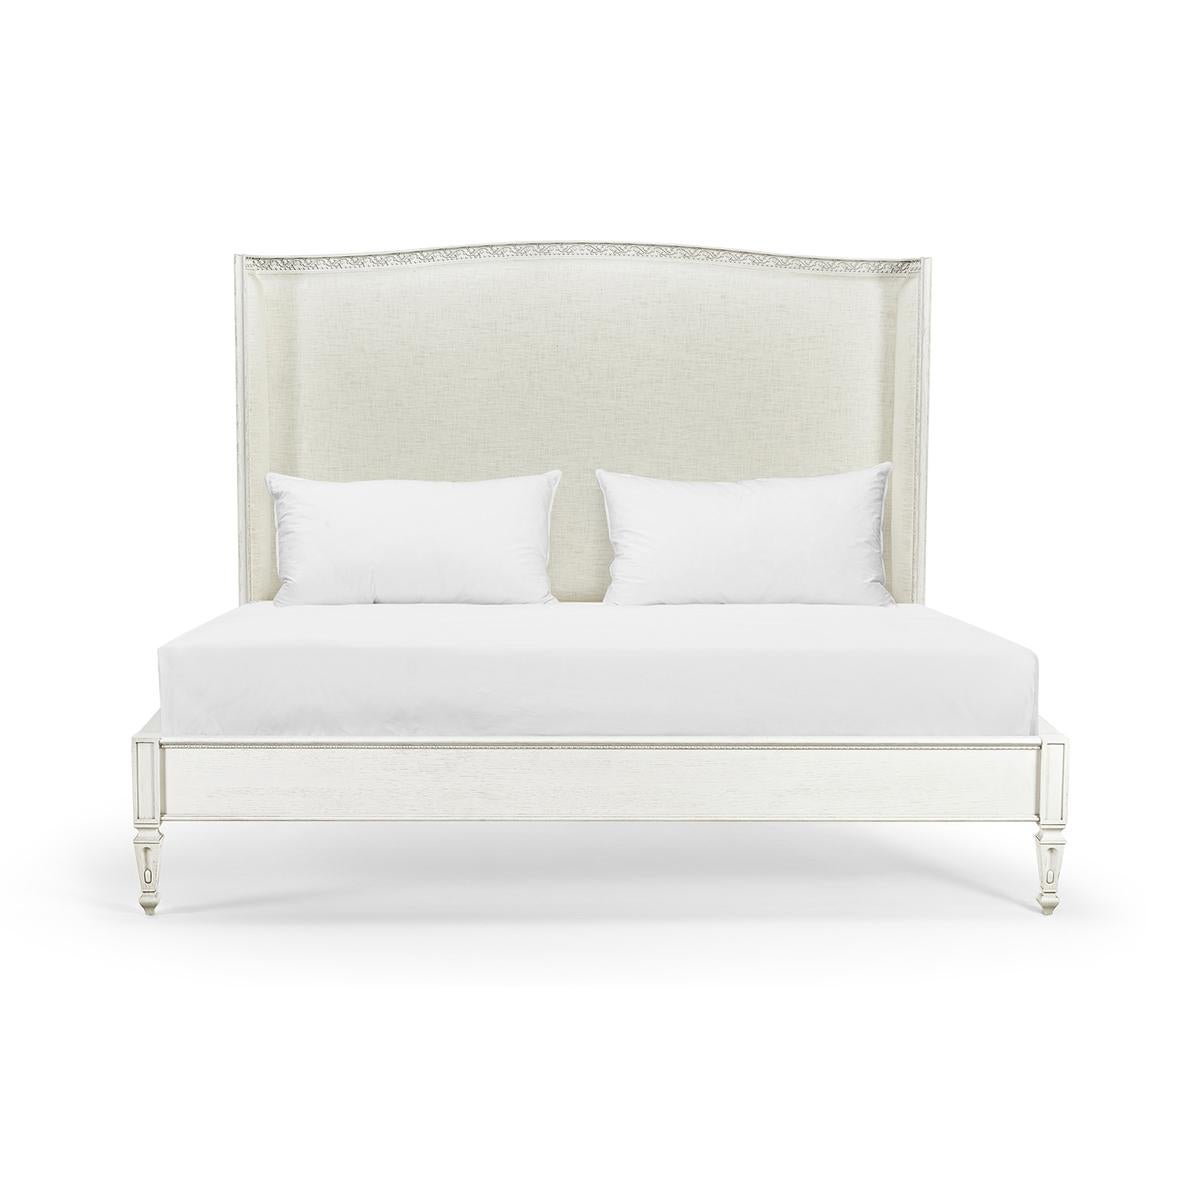 Swedish carved and painted king bed, with a wood frame that is embellished with floral motif trim wrapping around a shelter headboard upholstered in Belgian performance linen. Finished in chalk white, the elegant base is alighted upon a unique set